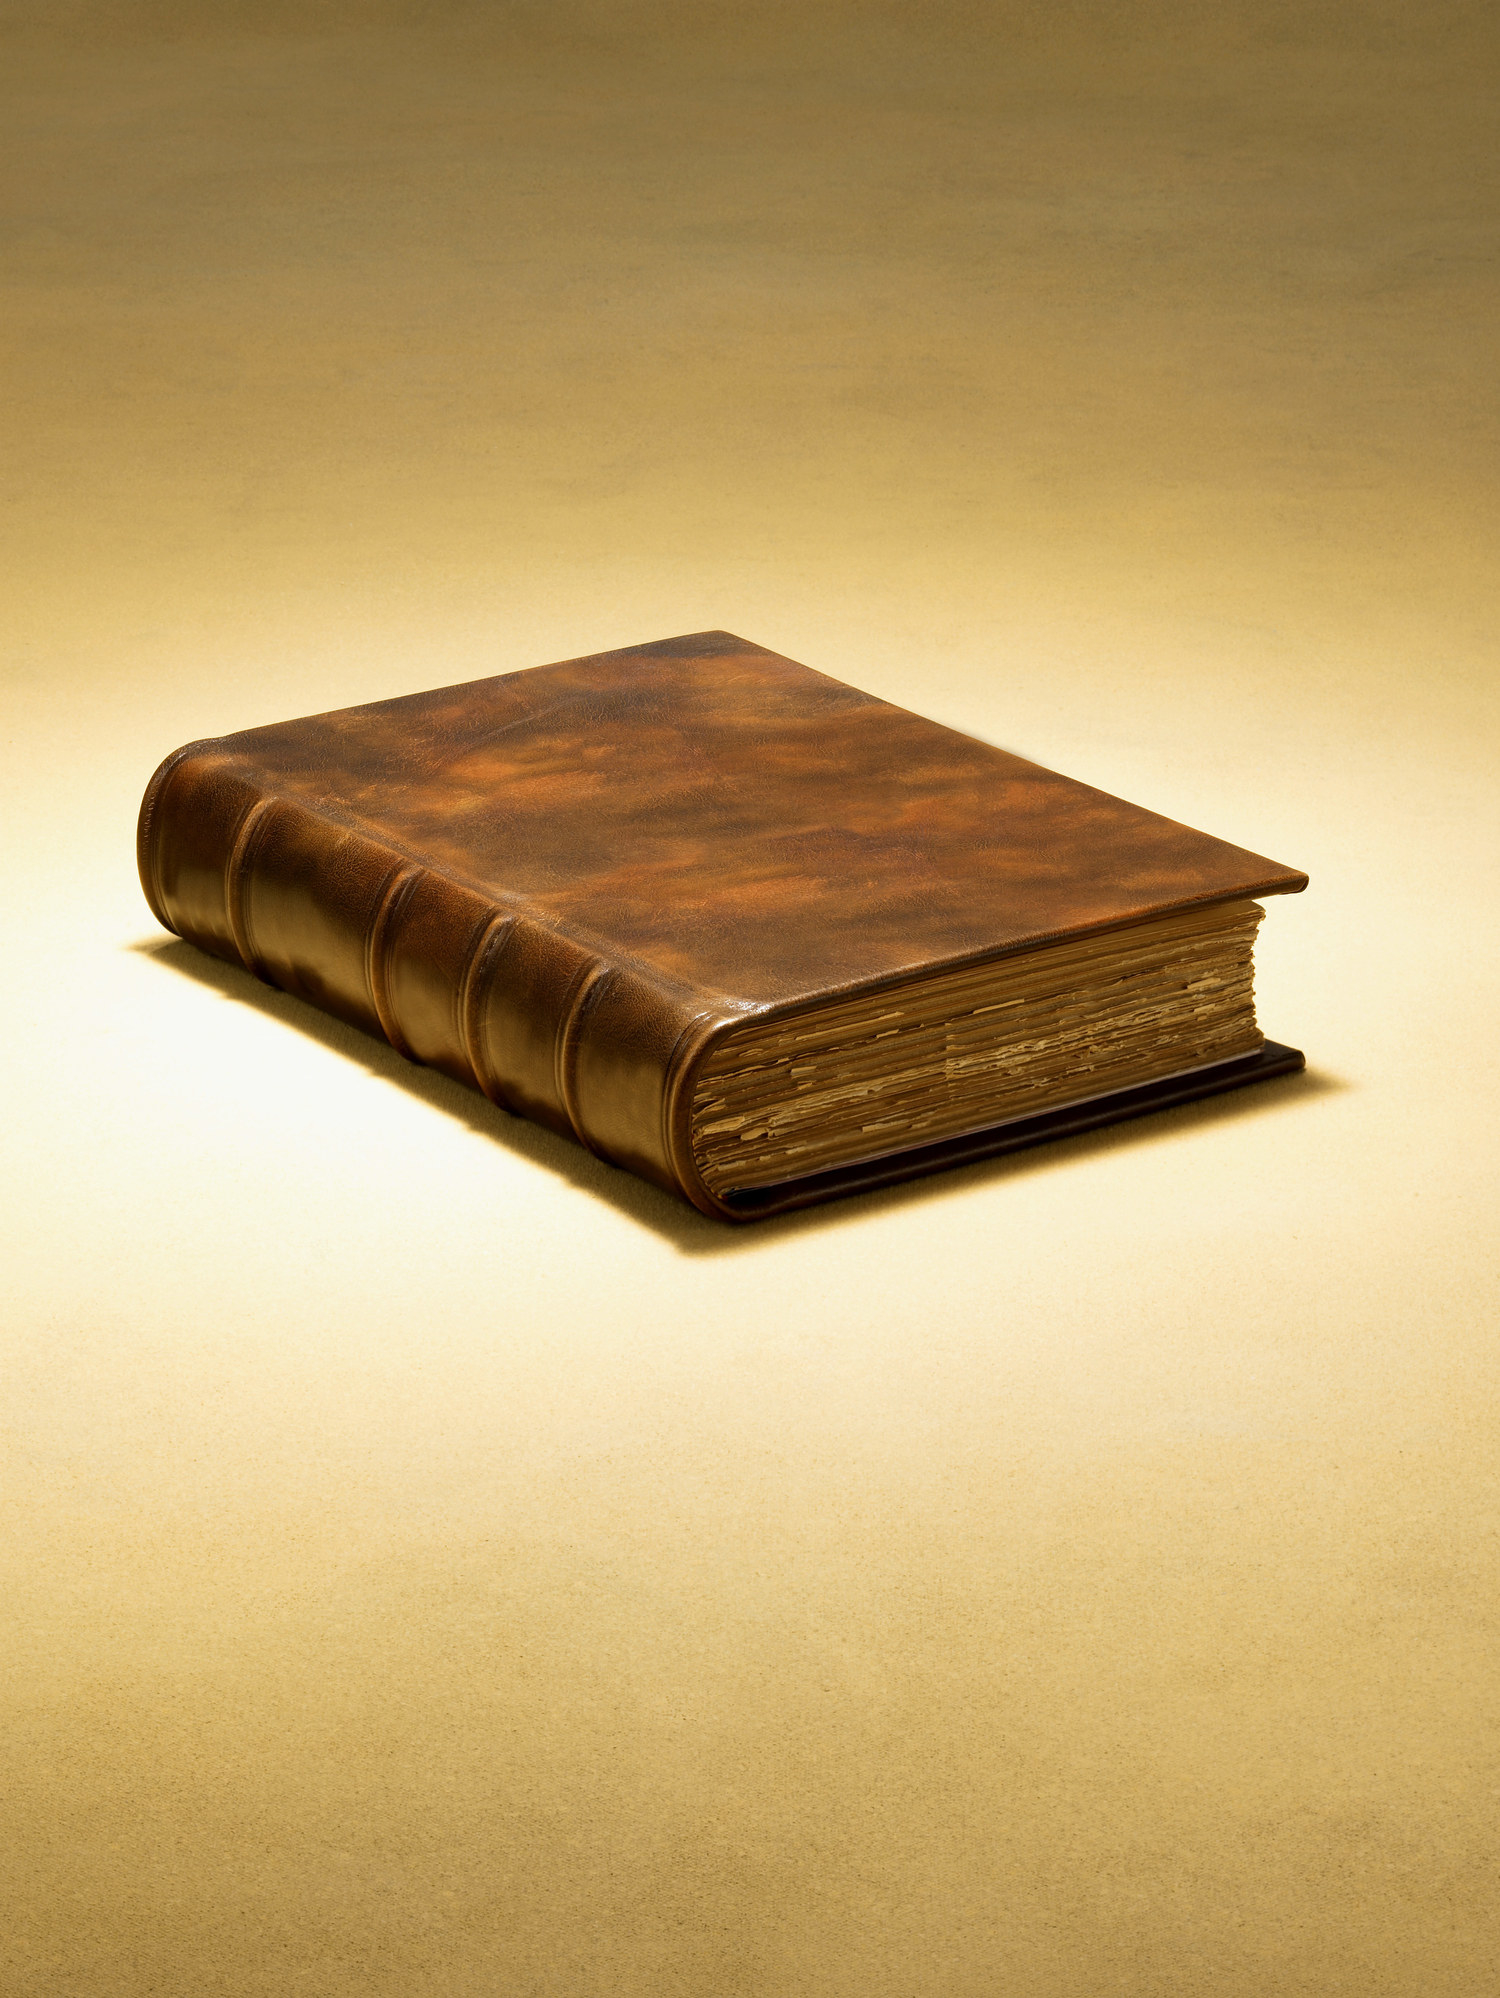 An old, weathered book with a brown hardcover